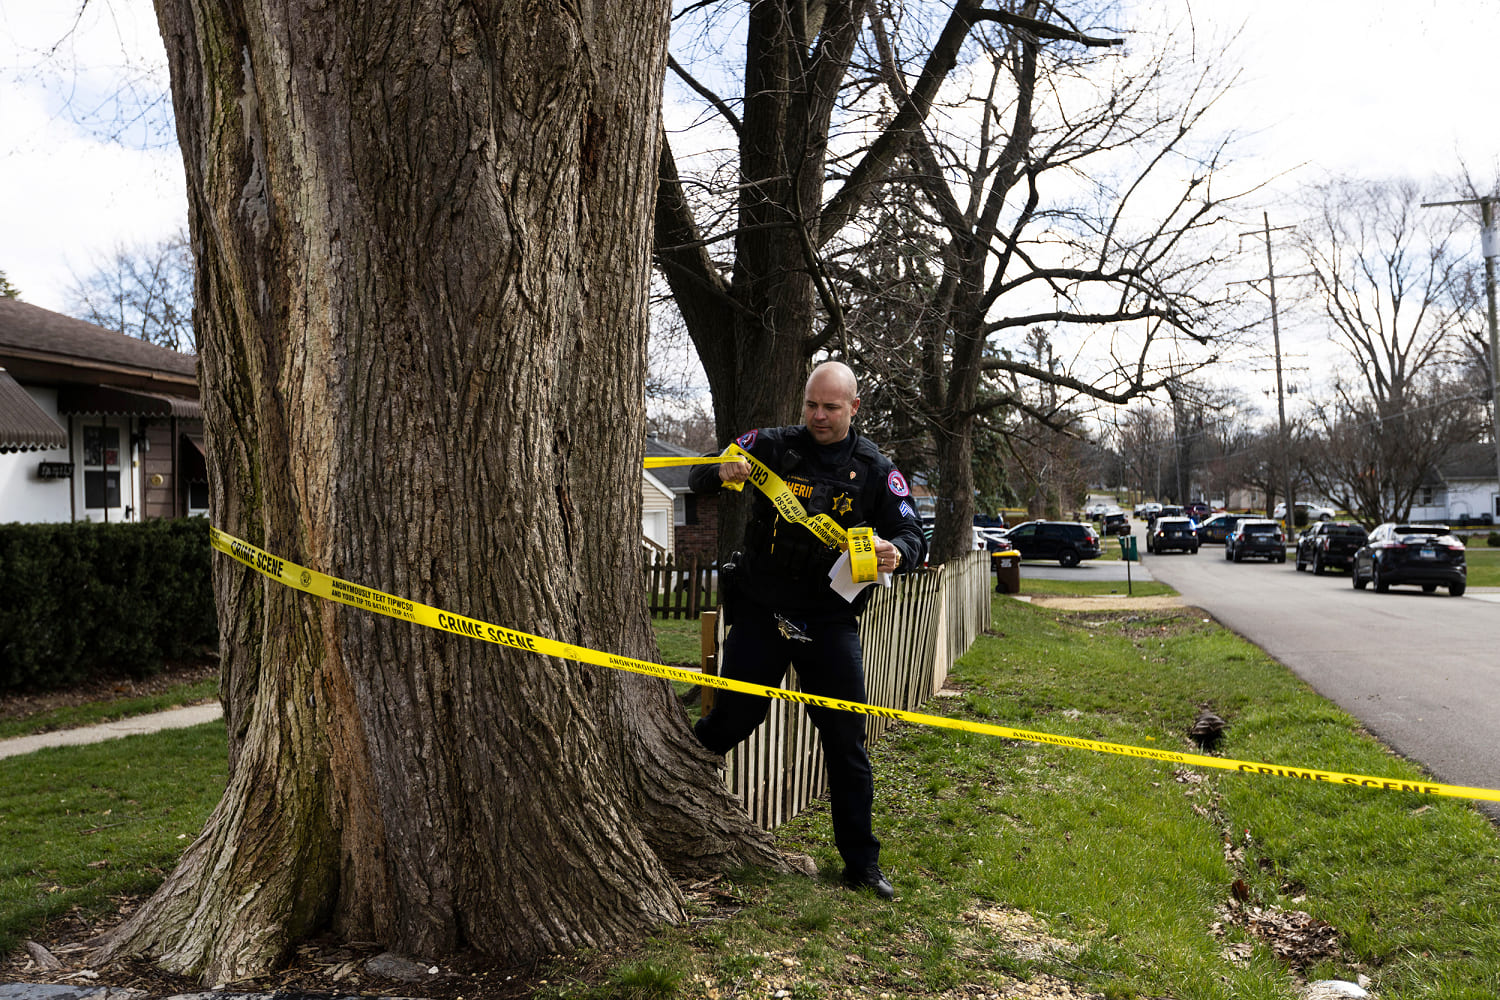 4 dead and 5 wounded in Illinois stabbing rampage; 22-year-old suspect in custody